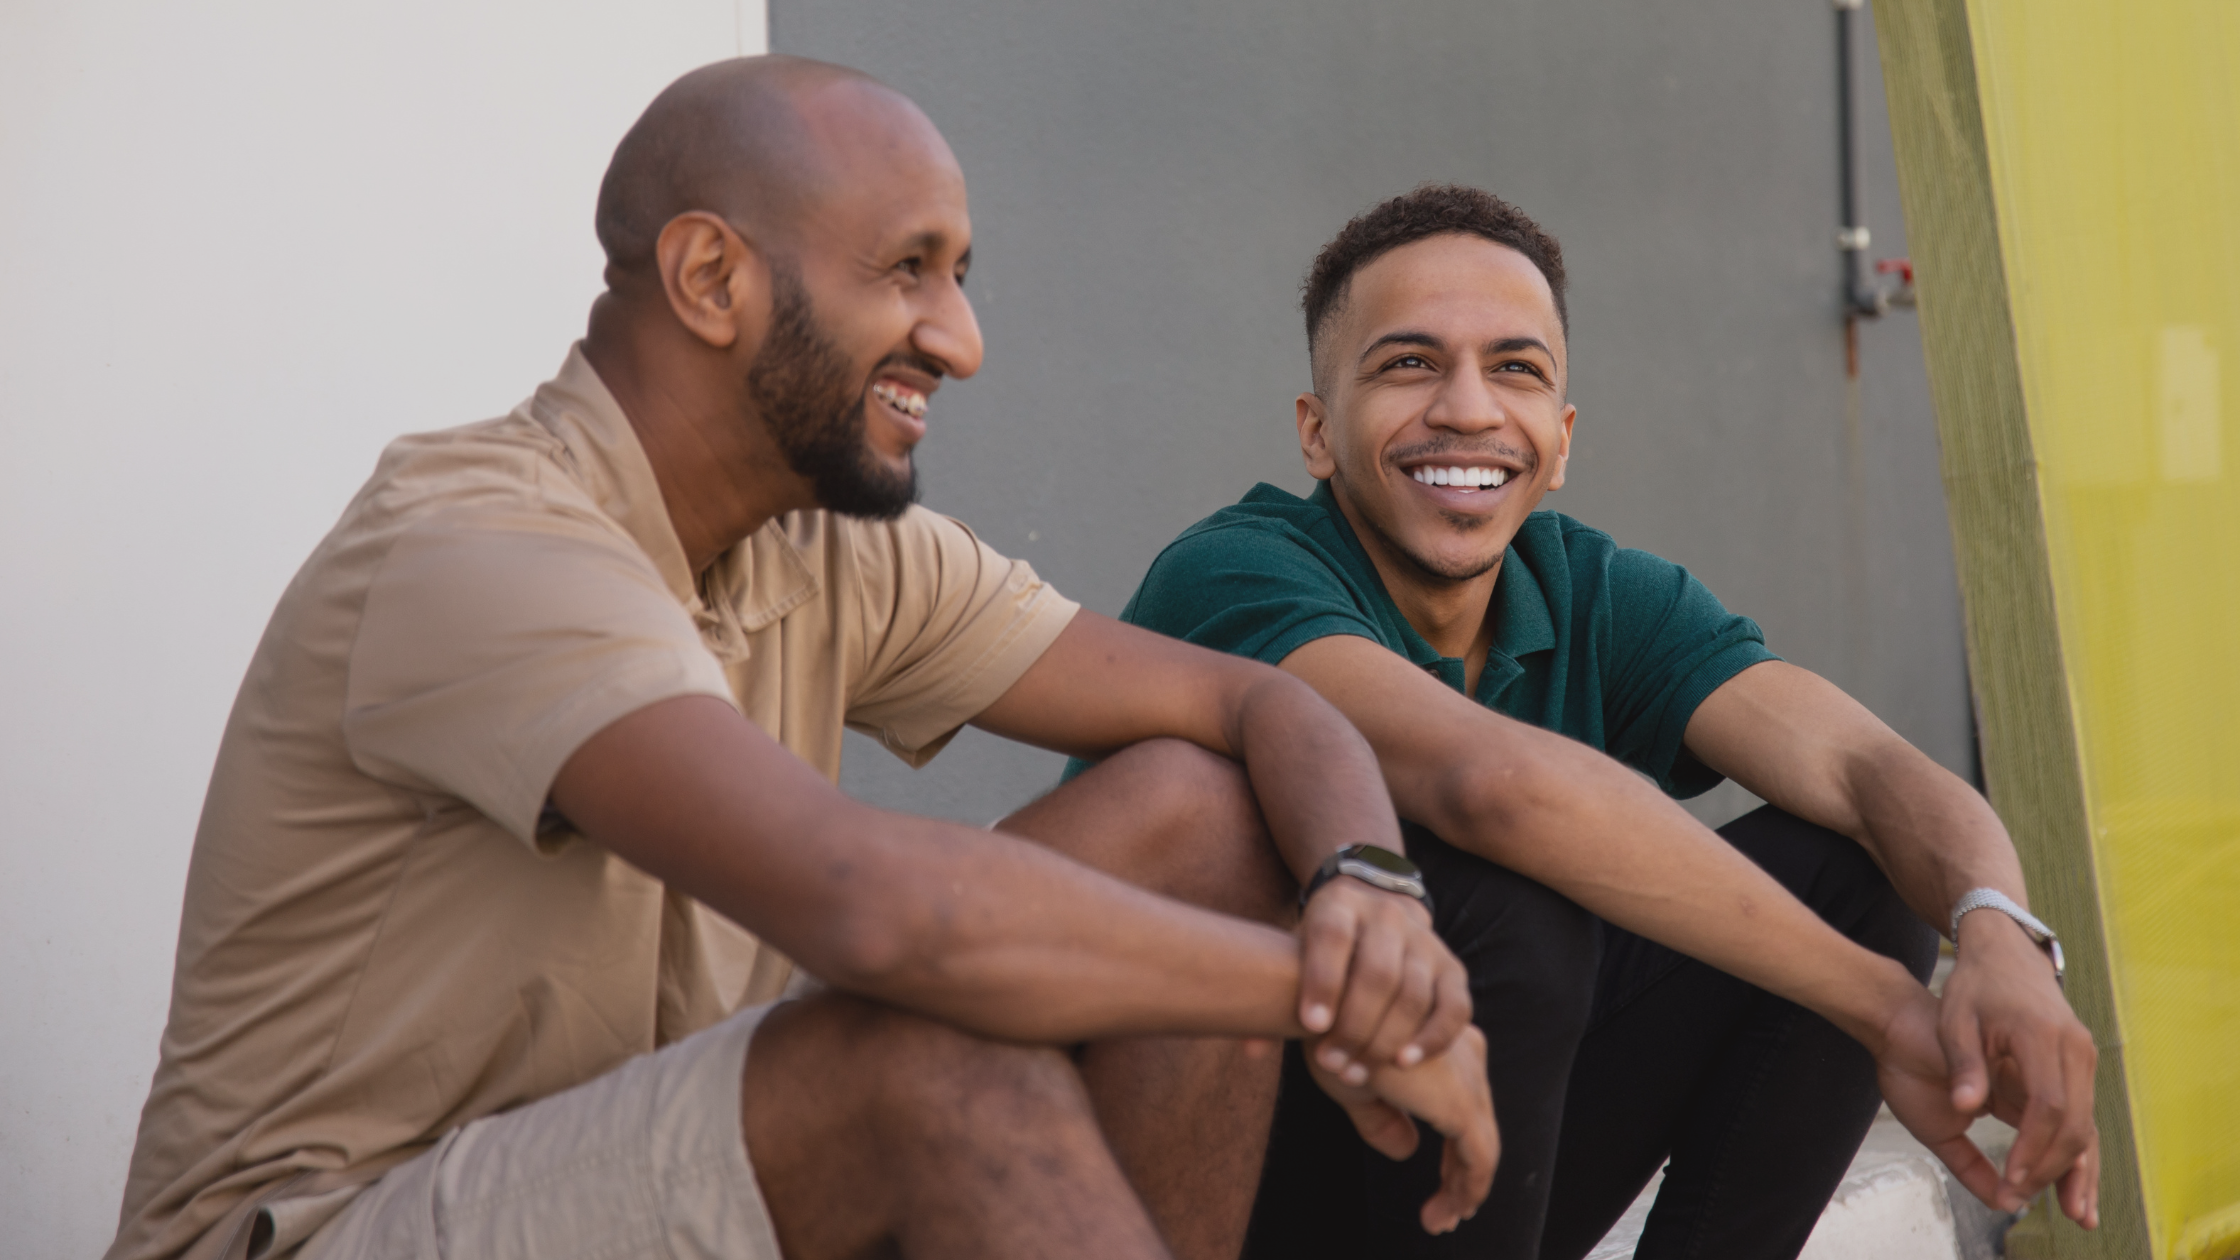 Toolkit: Resources for Men’s Mental Health